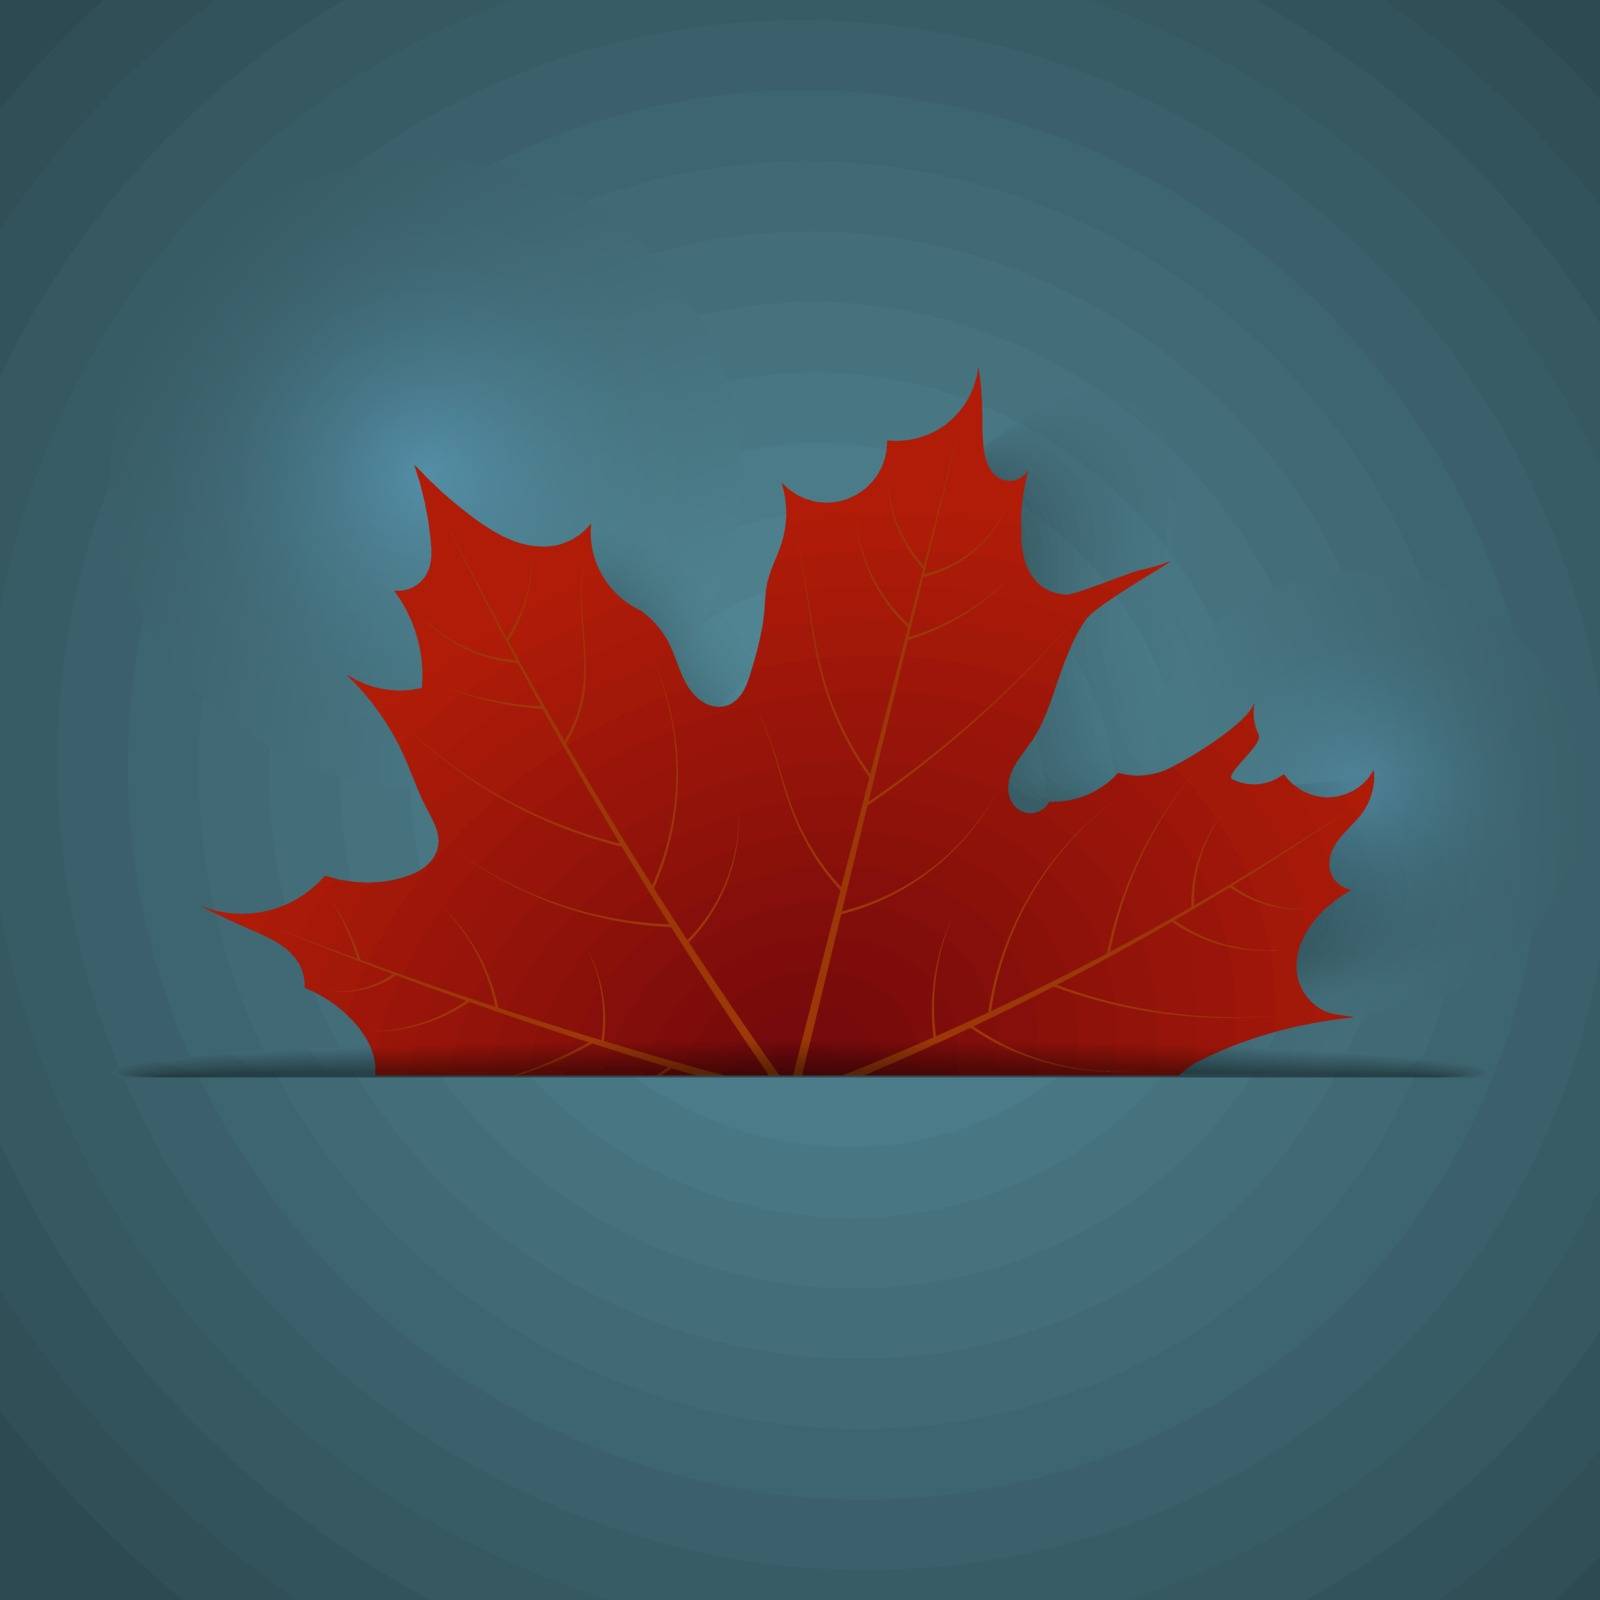 Red maple leaf on a blue background